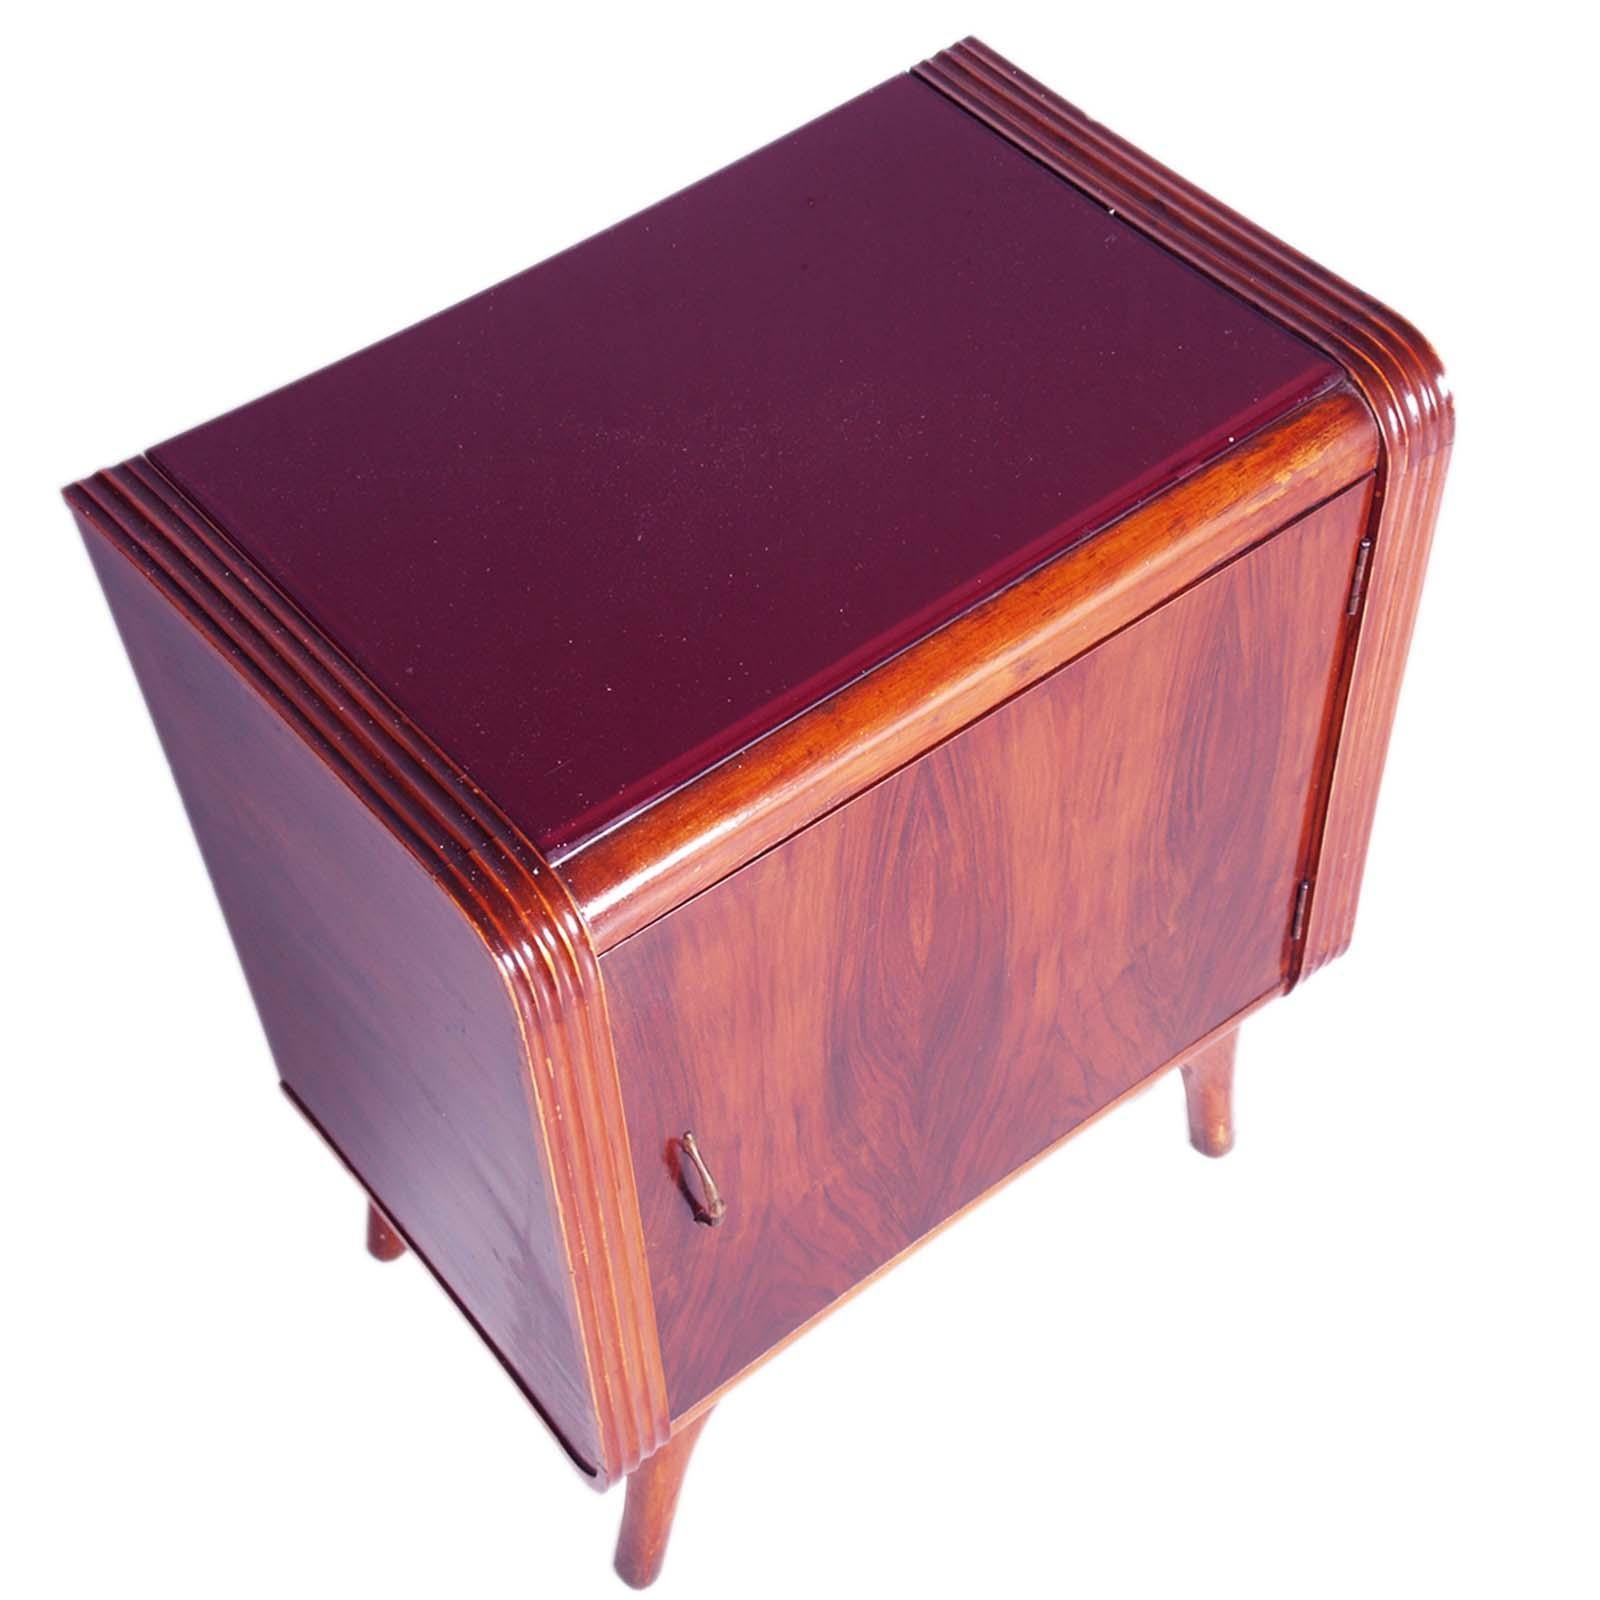 Very stylish Mid-Century Modern nightstand by Permanente Mobili, Paolo Buffa designer atributed, in walnut and veneer walnut, mahogany veneer interior. Wax polished

About the Designer
Paolo Buffa
One of the greatest Mid-Century Modern designers